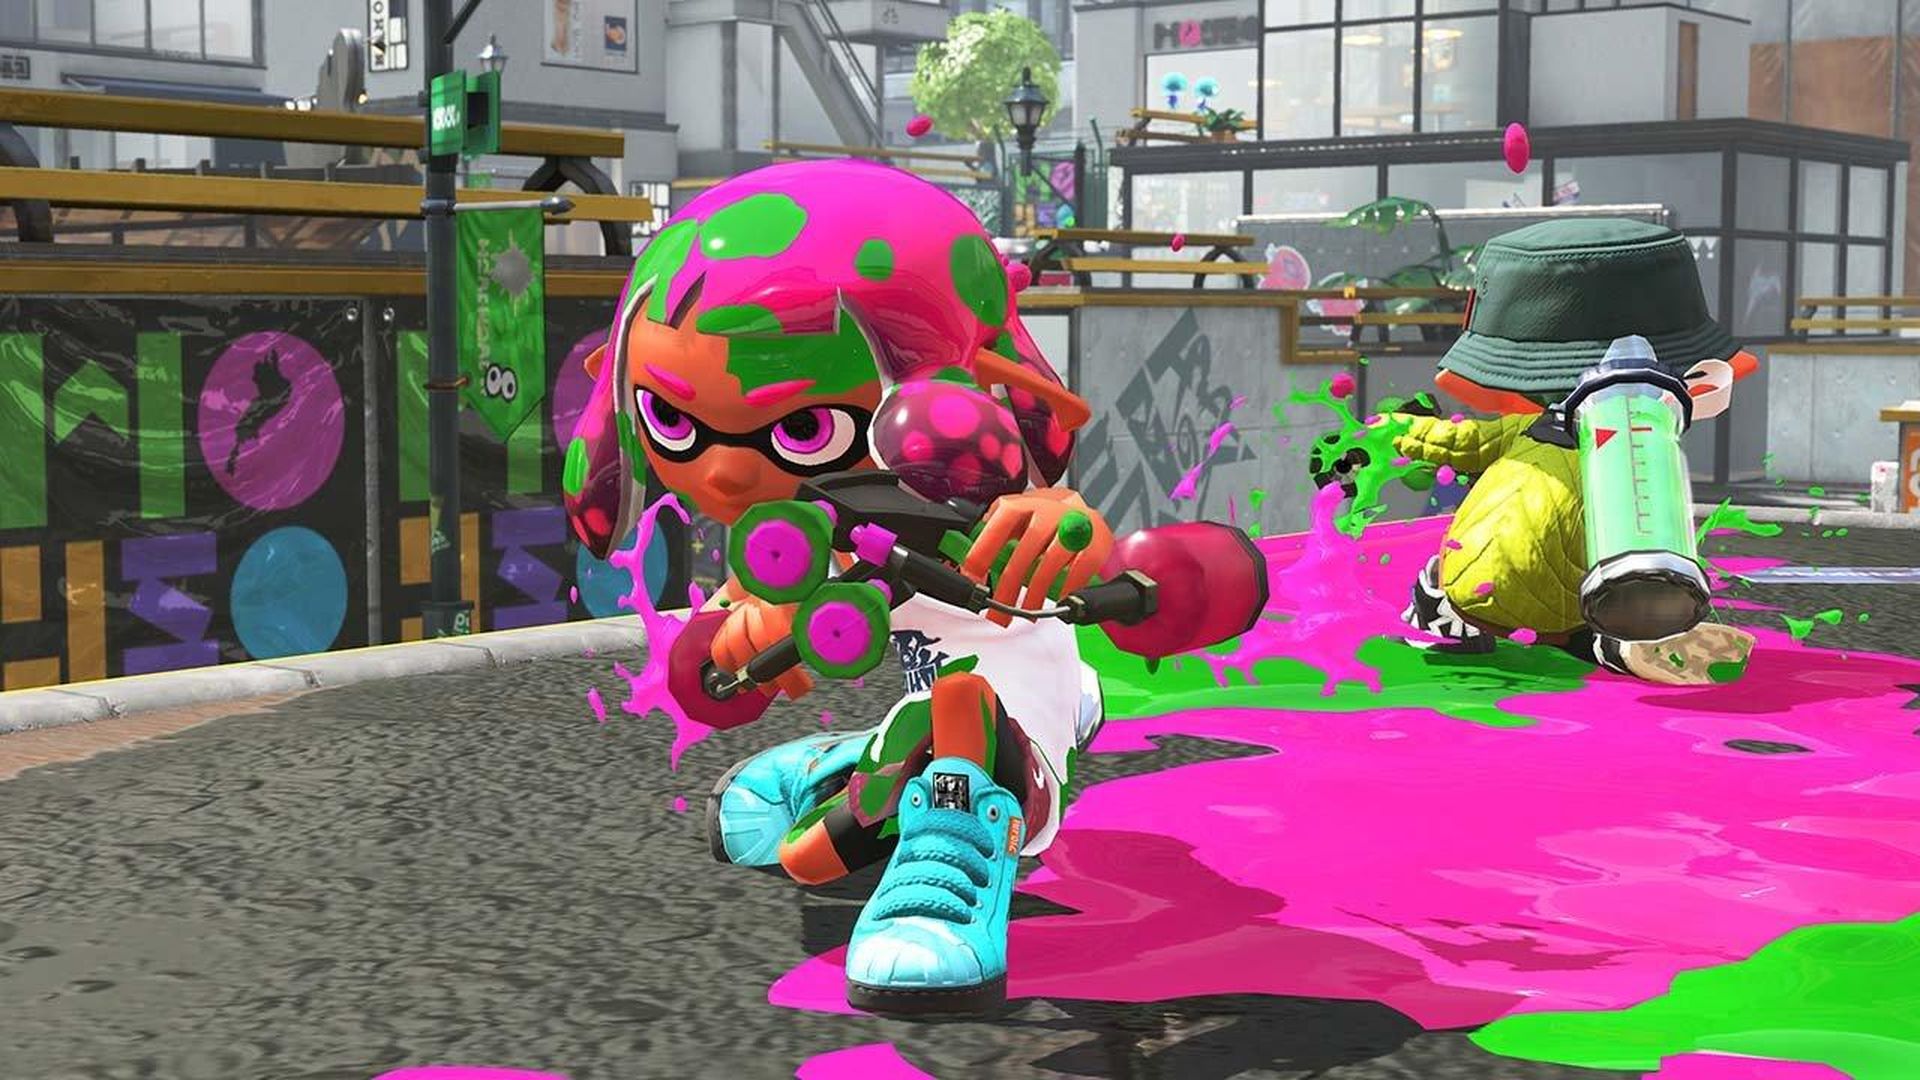 How to draw in Splatoon 2?